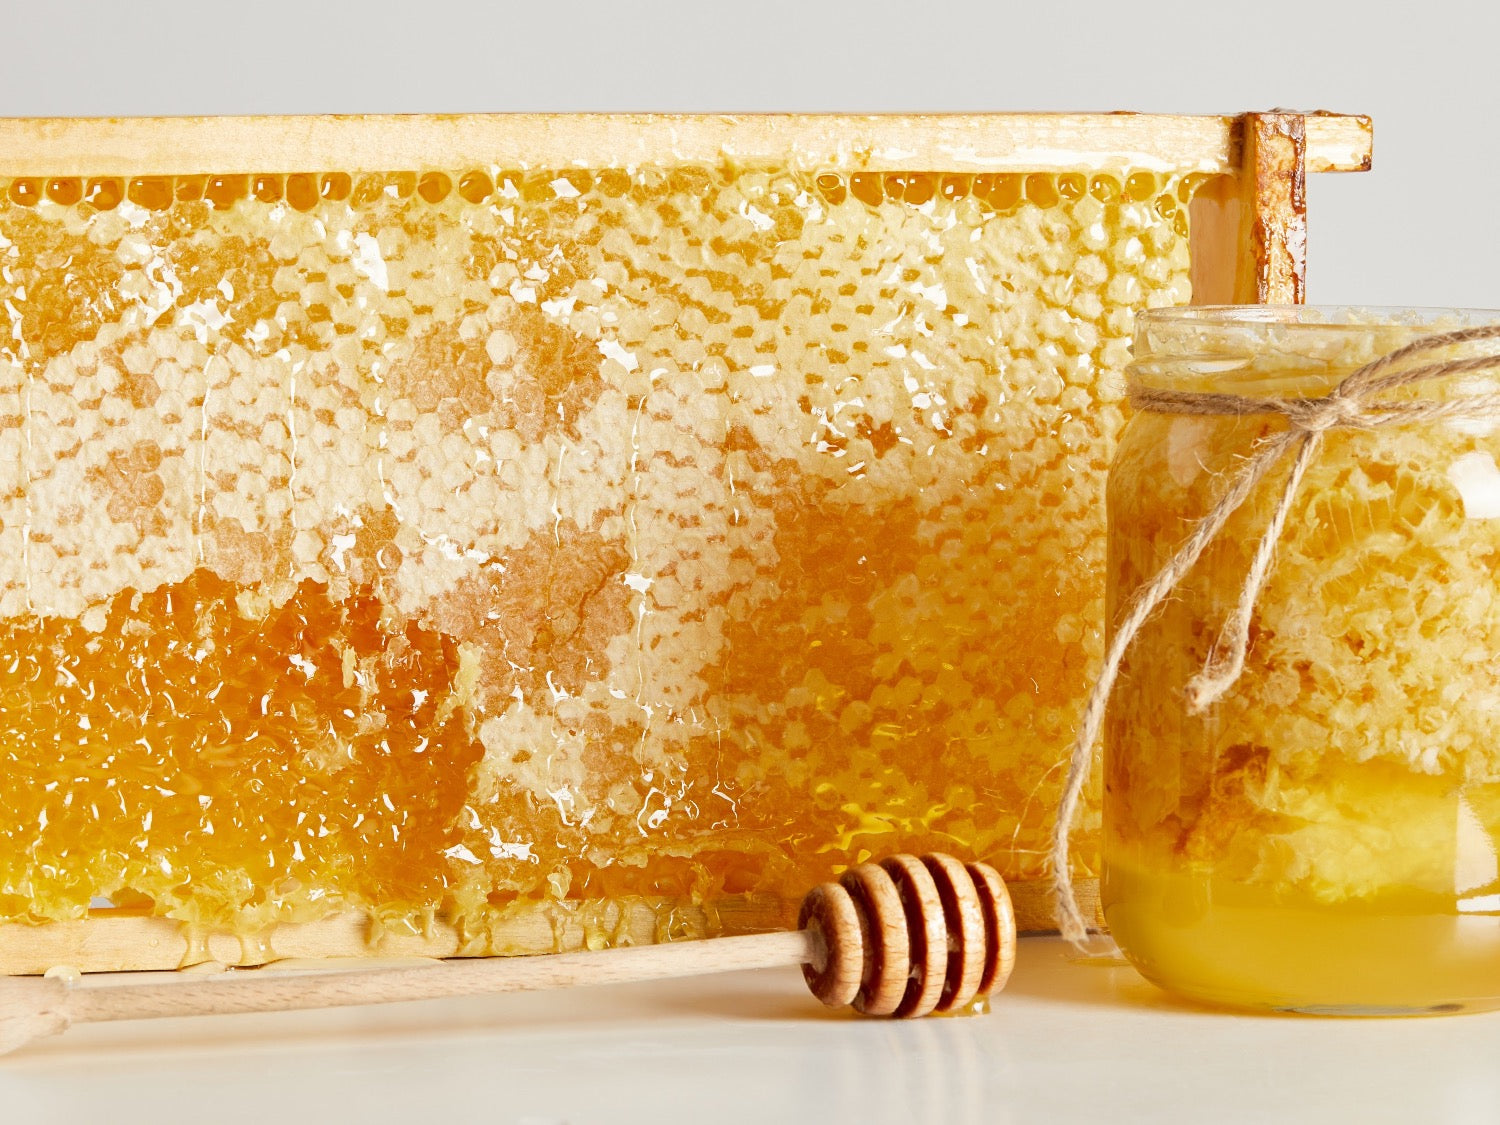 Display of honey, beeswax and honey dipper.